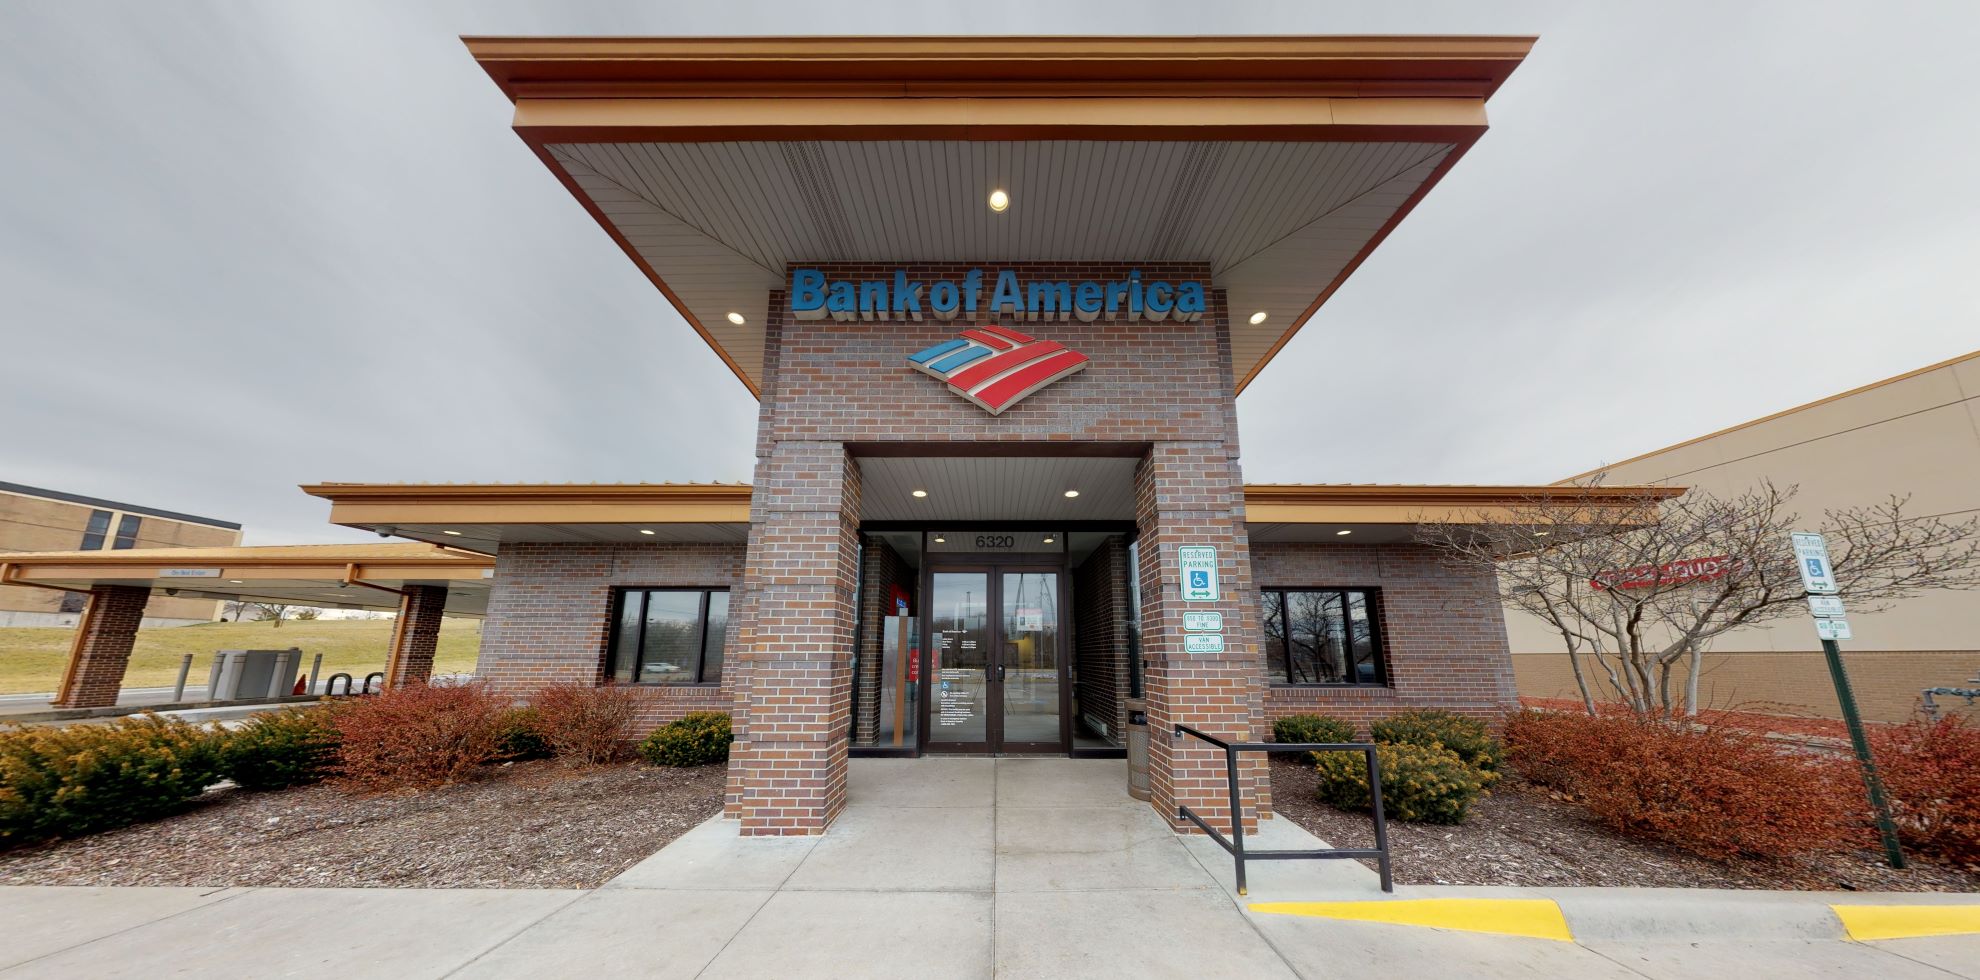 Bank of America financial center with drive-thru ATM and teller | 6320 Prospect Ave, Kansas City, MO 64132